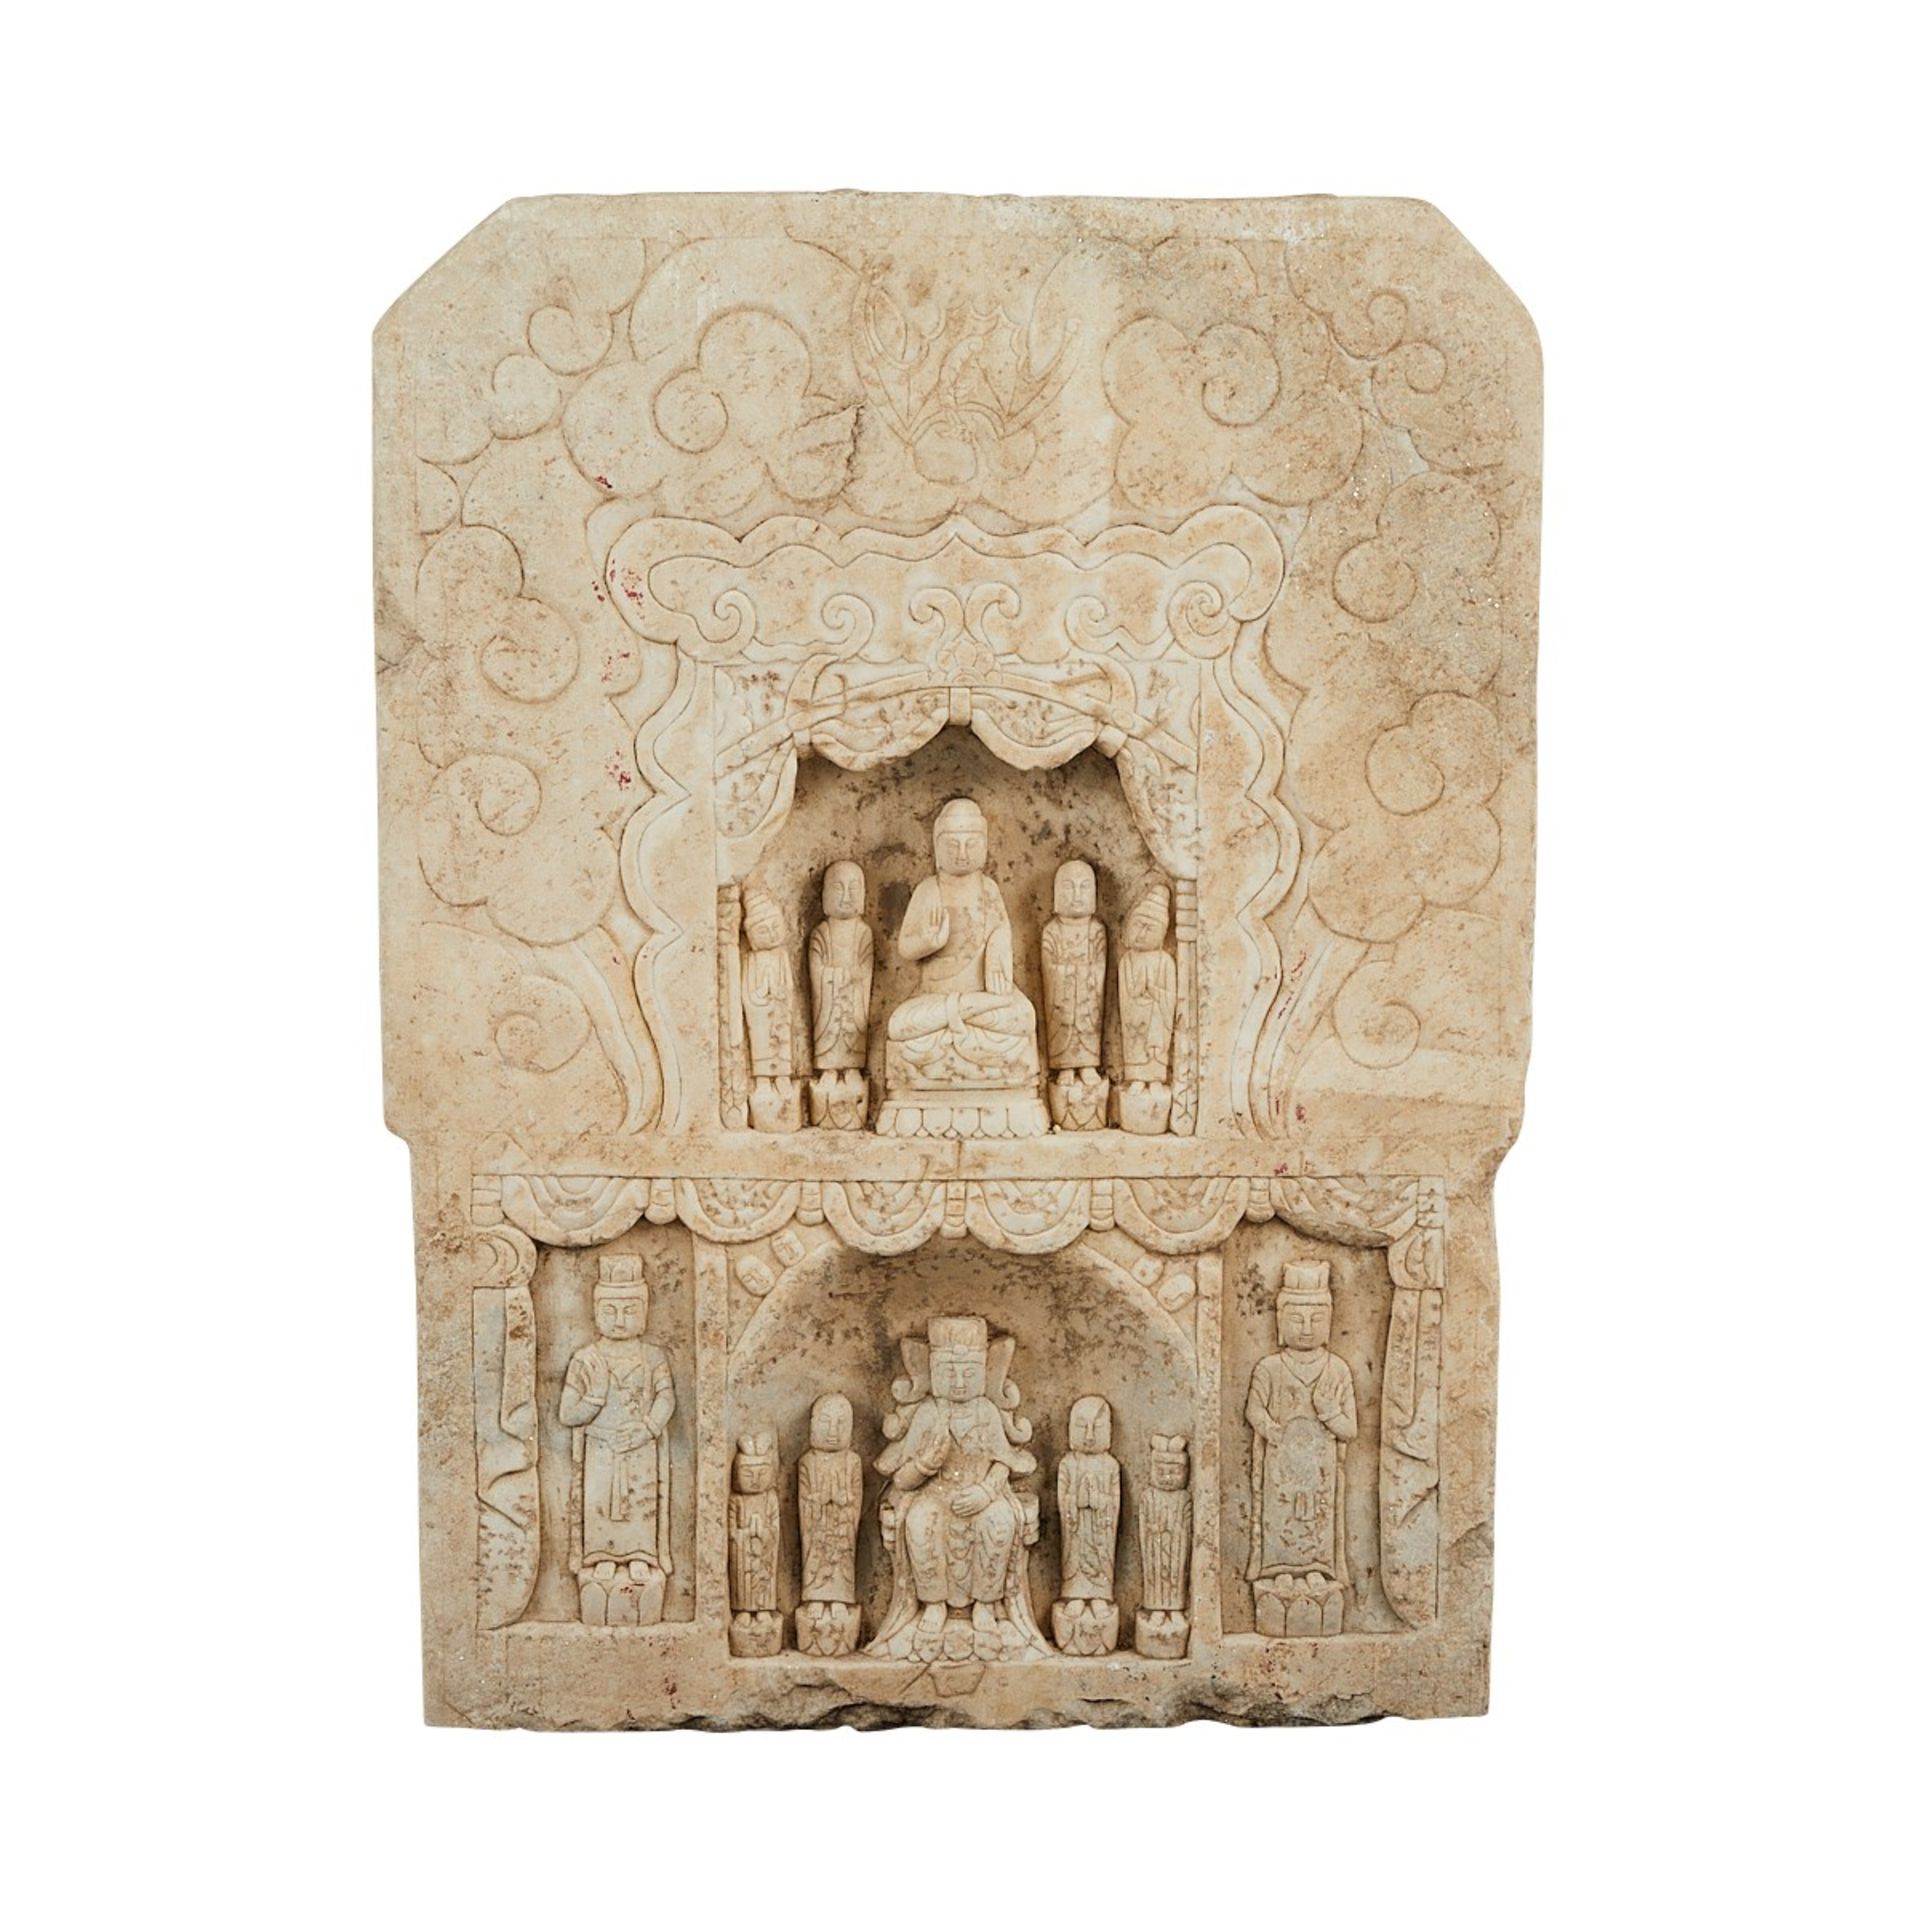 Carved Marble Buddha Vignette - Image 3 of 11